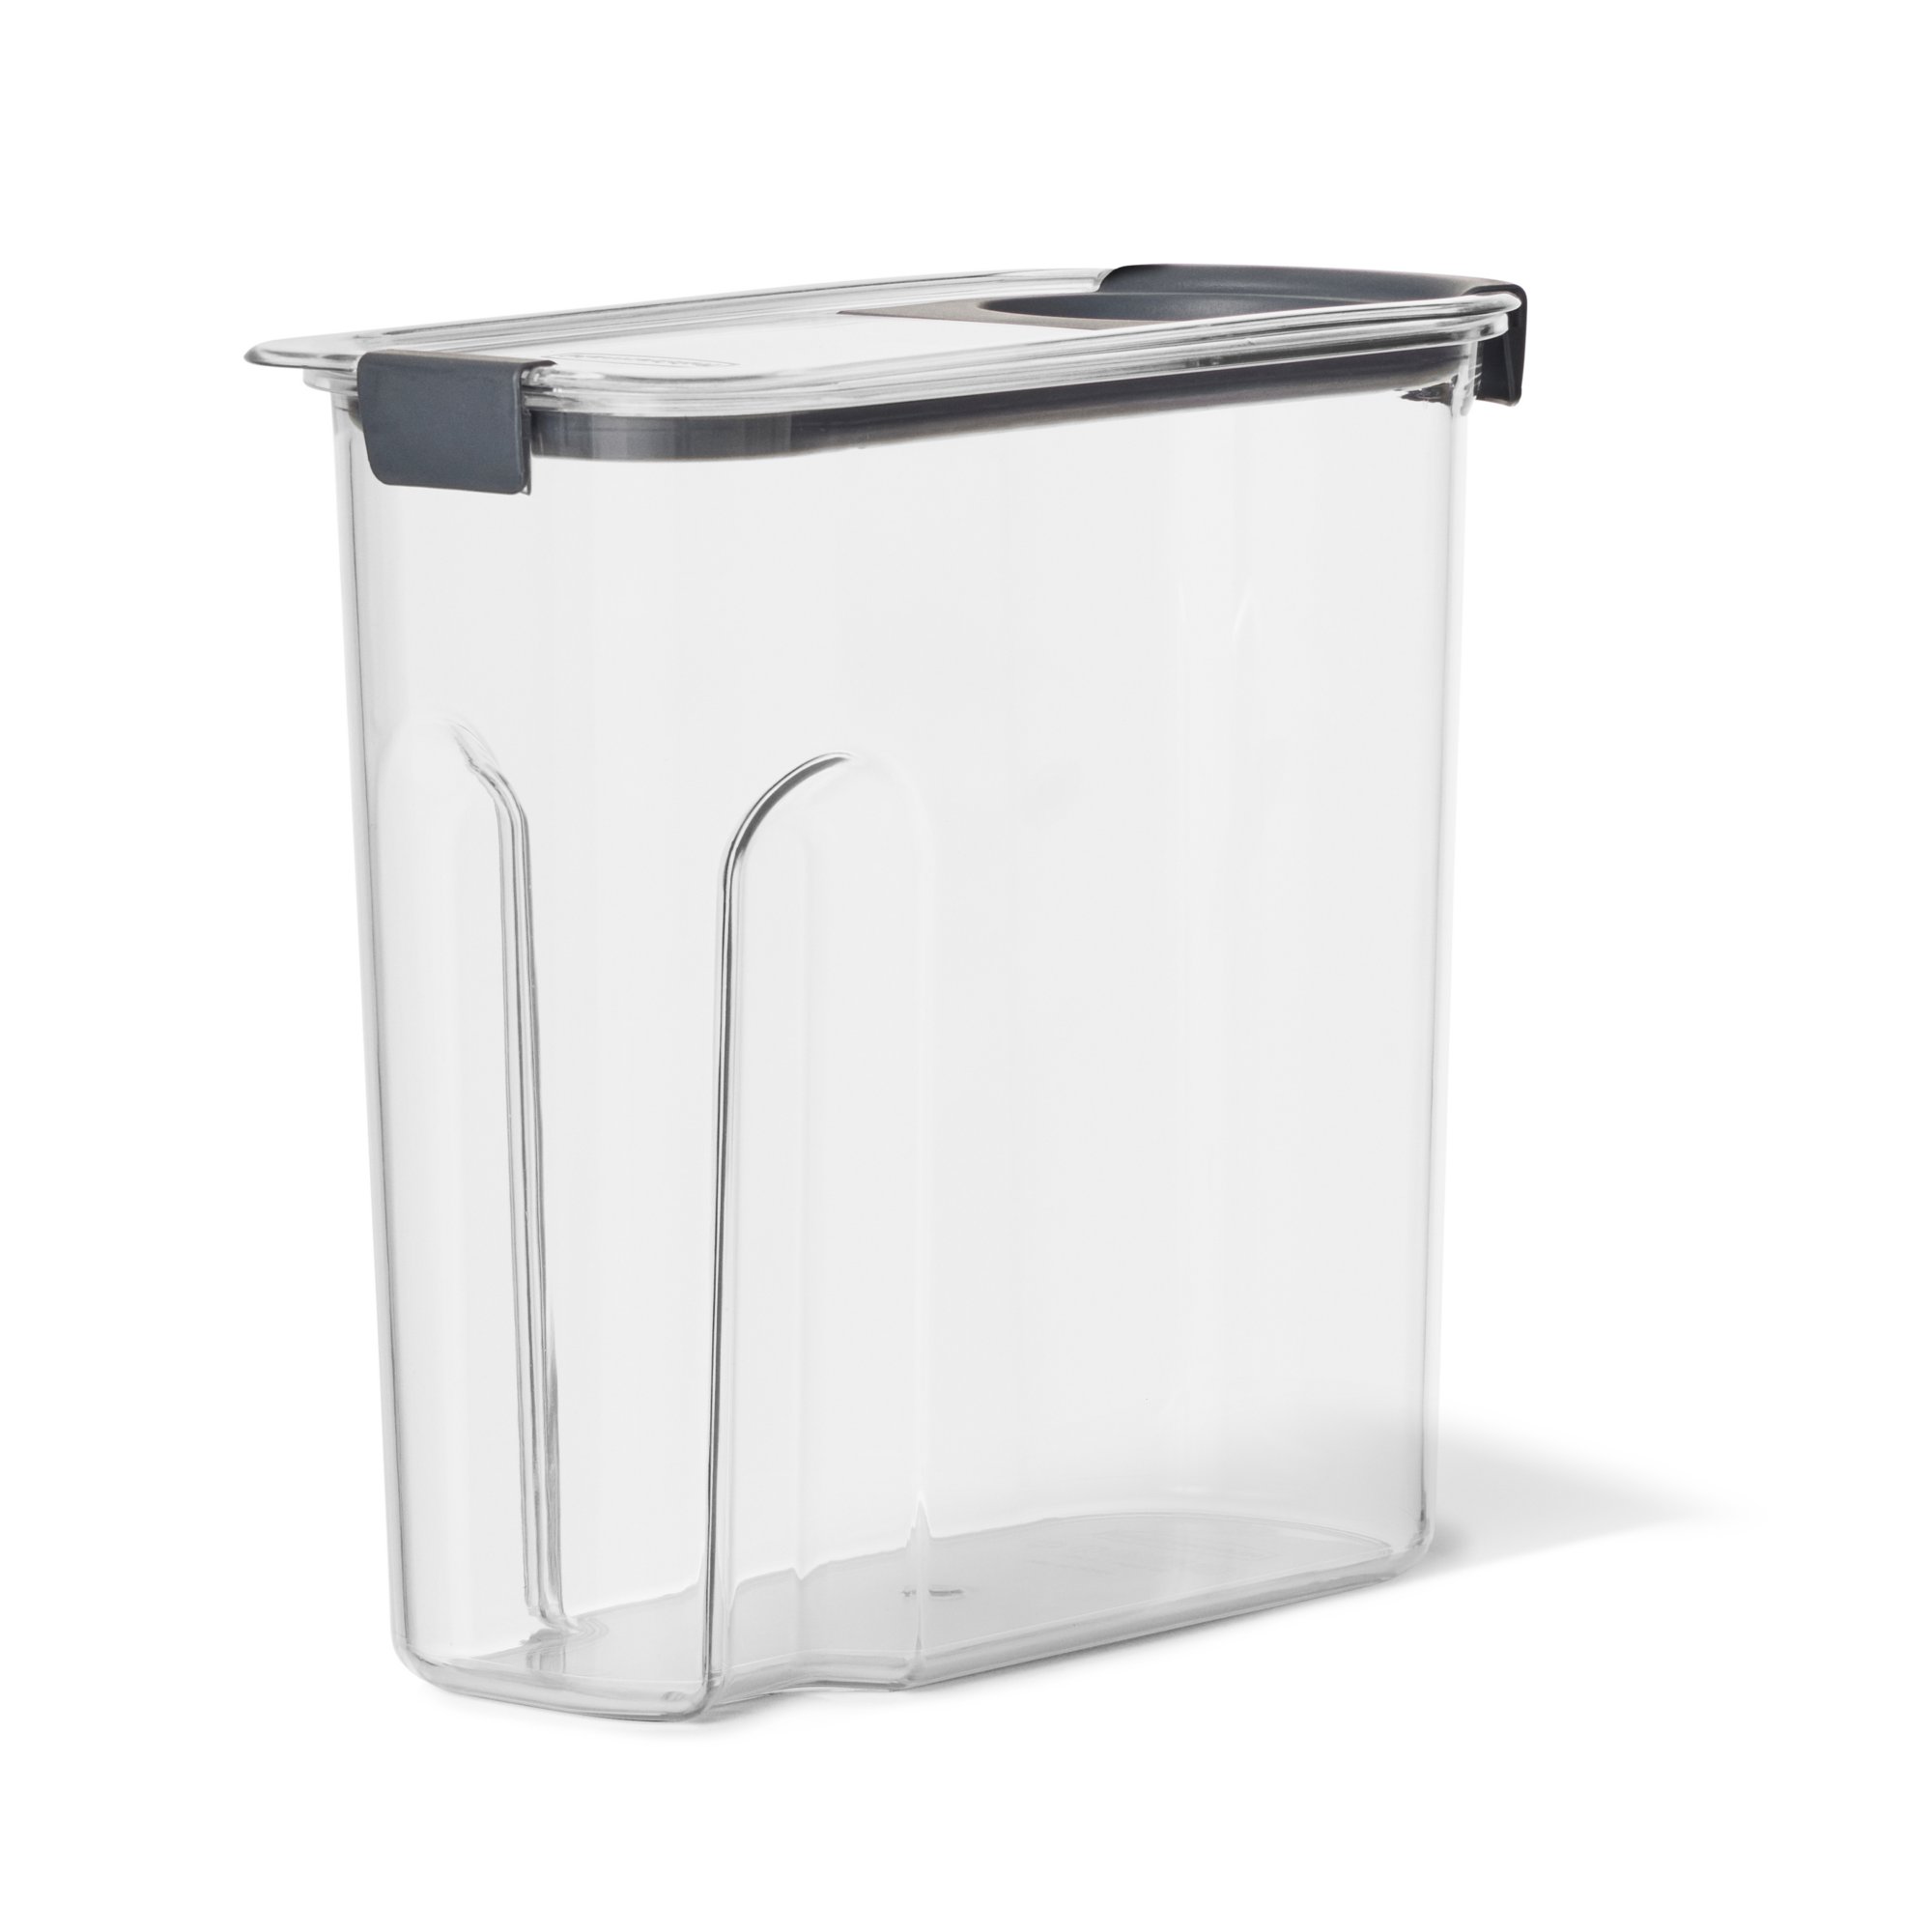 Rubbermaid 745176257628 Cereal/Snack Storage Container Each 1.5